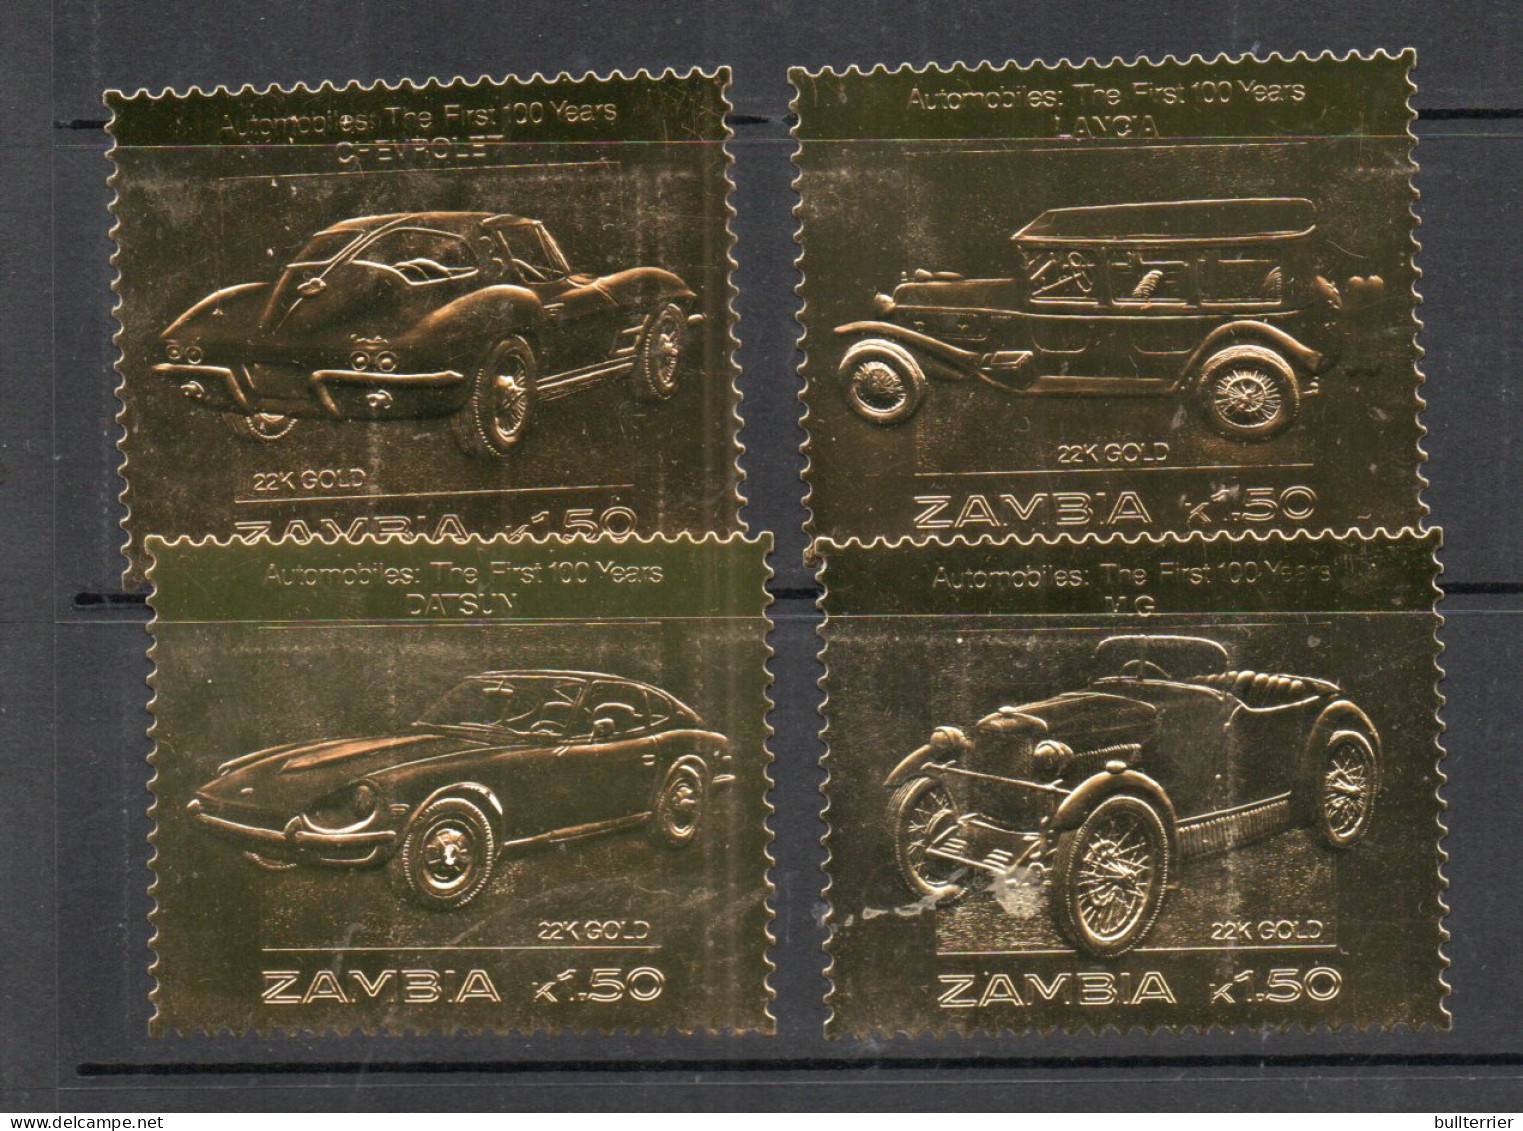 ZAMBIA - 1987 - CLASSIC CARS SET OF 4 GOLD  FOIL EMBOSSED  MINT NEVER HINGED  - Palomas, Tórtolas